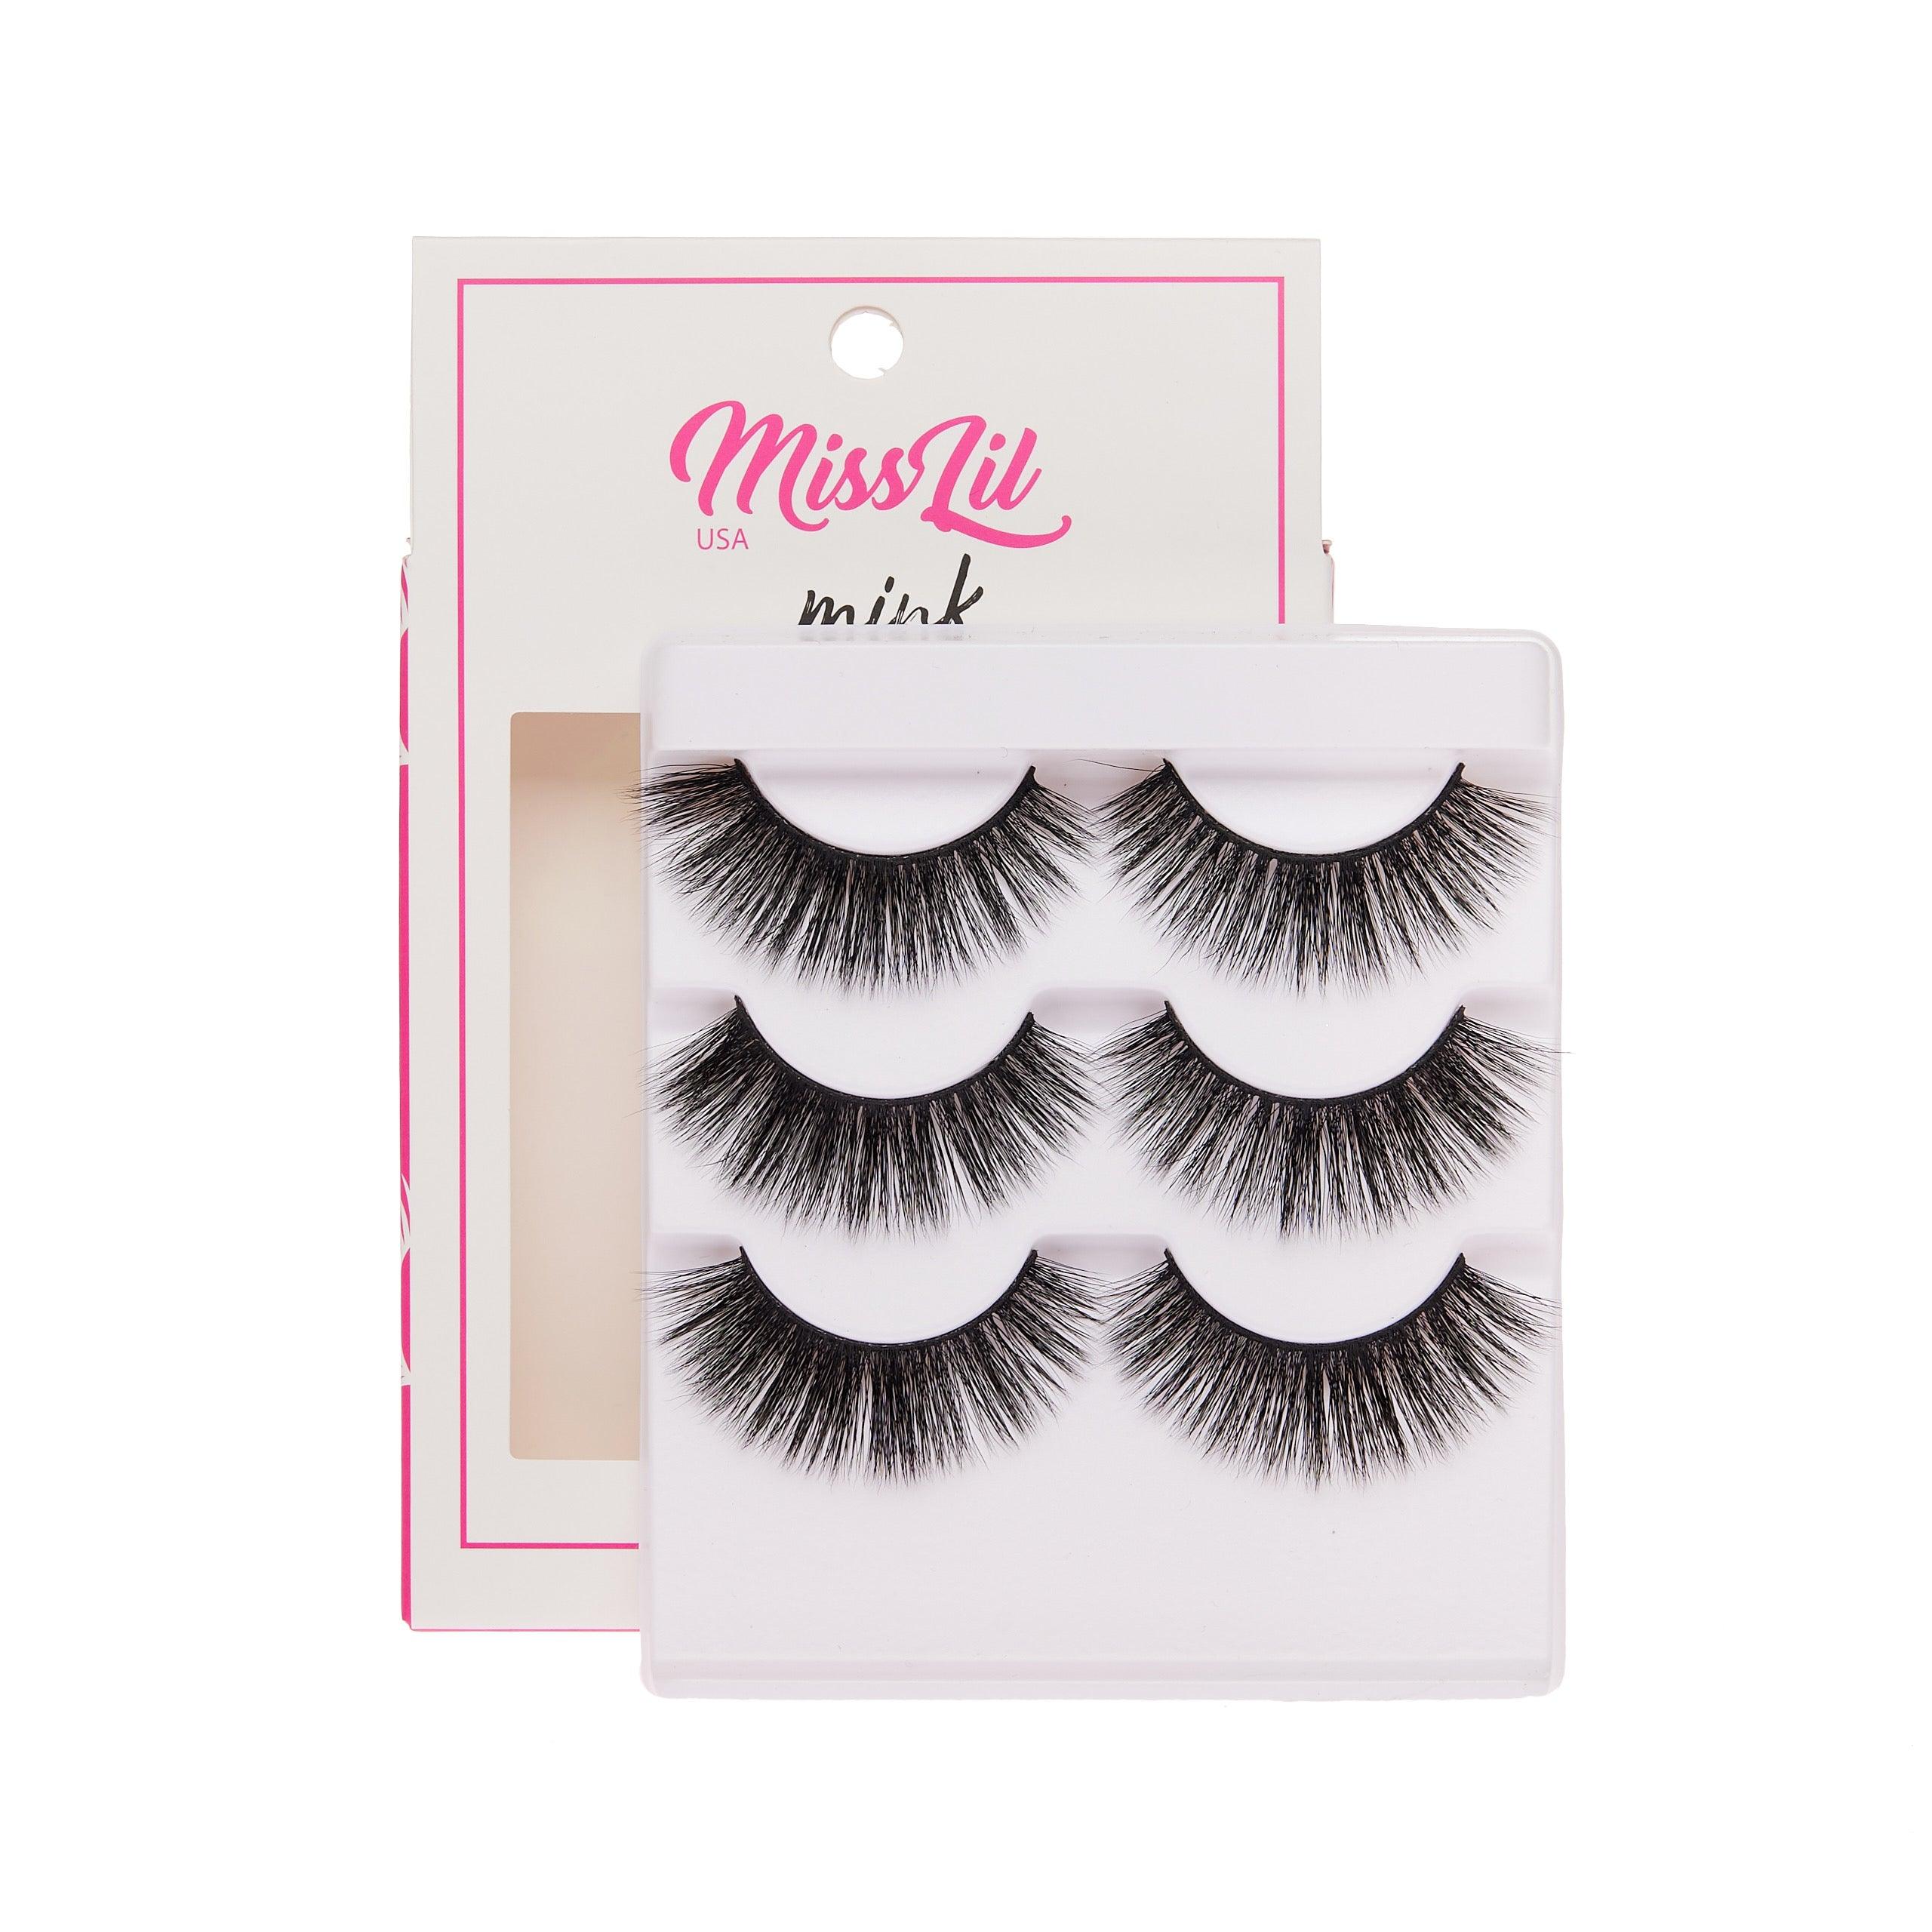 3-Pair Faux Mink Effect Eyelashes - Lash Party Collection #11 - Pack of 3 - Miss Lil USA